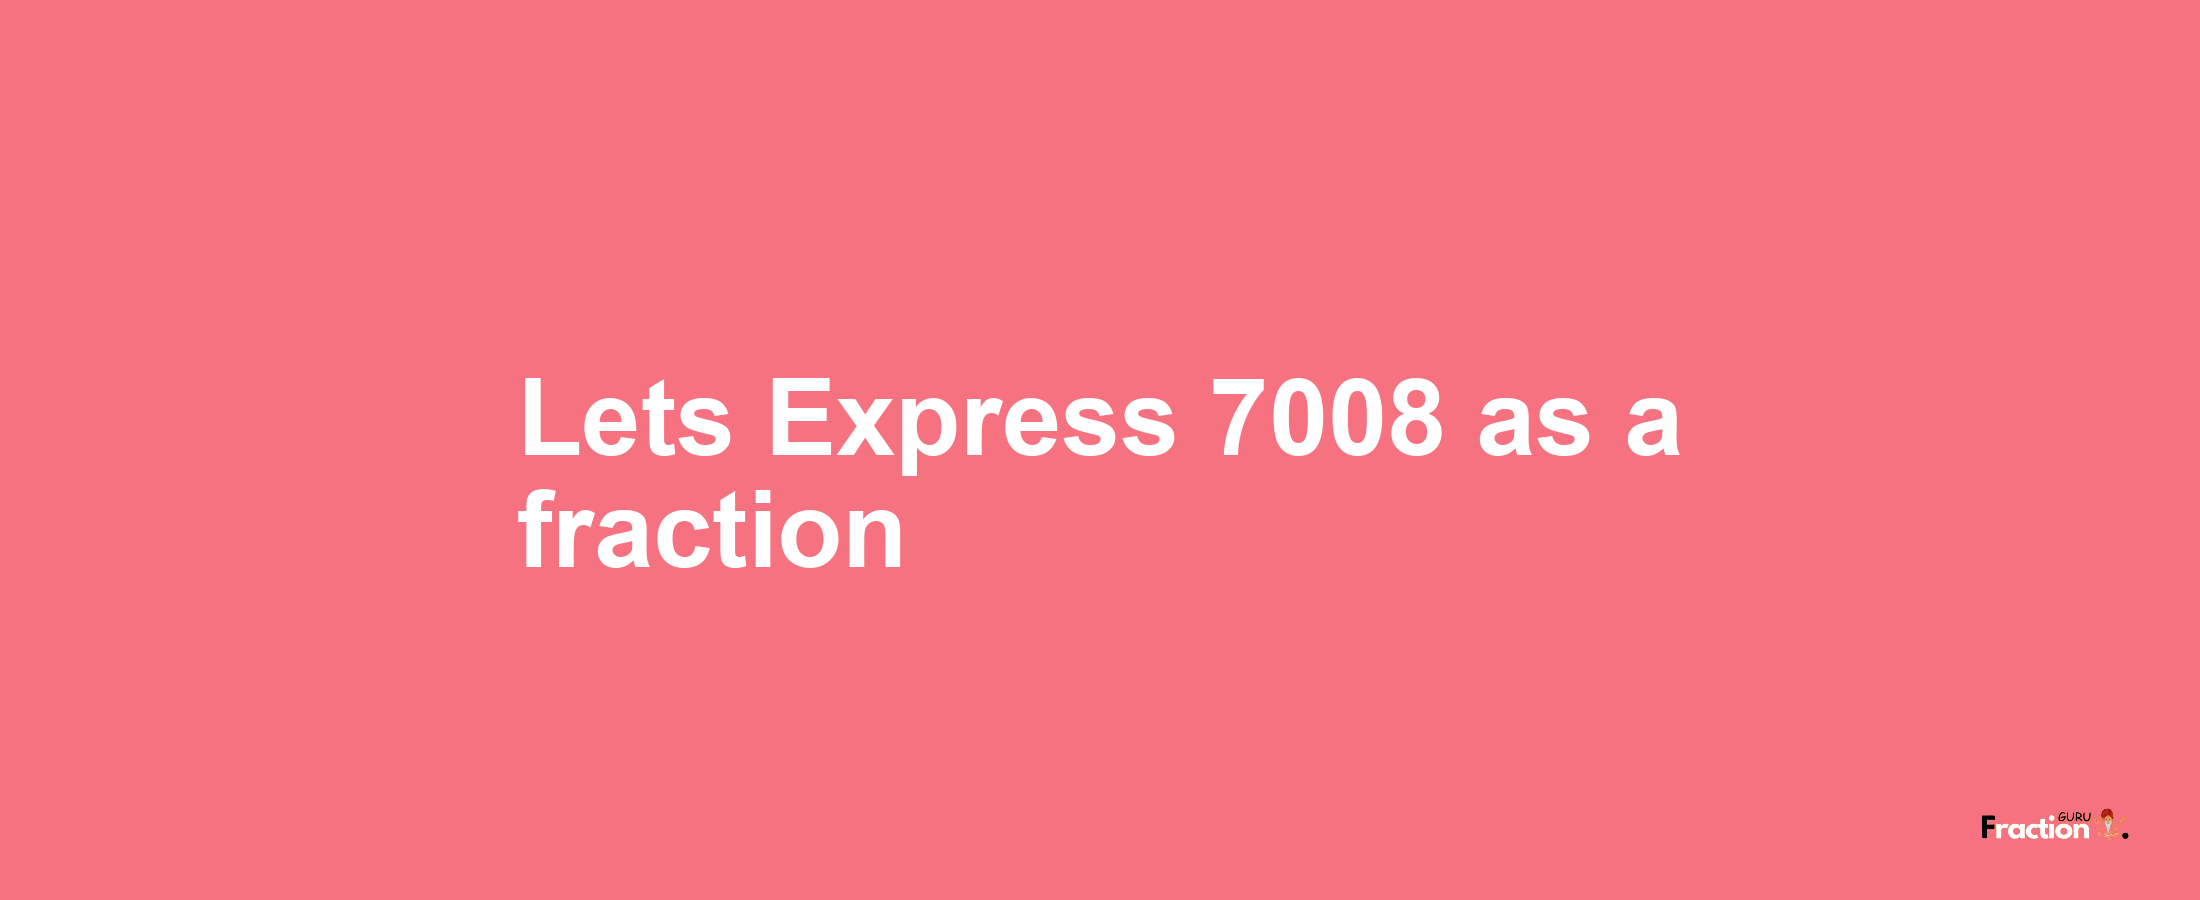 Lets Express 7008 as afraction